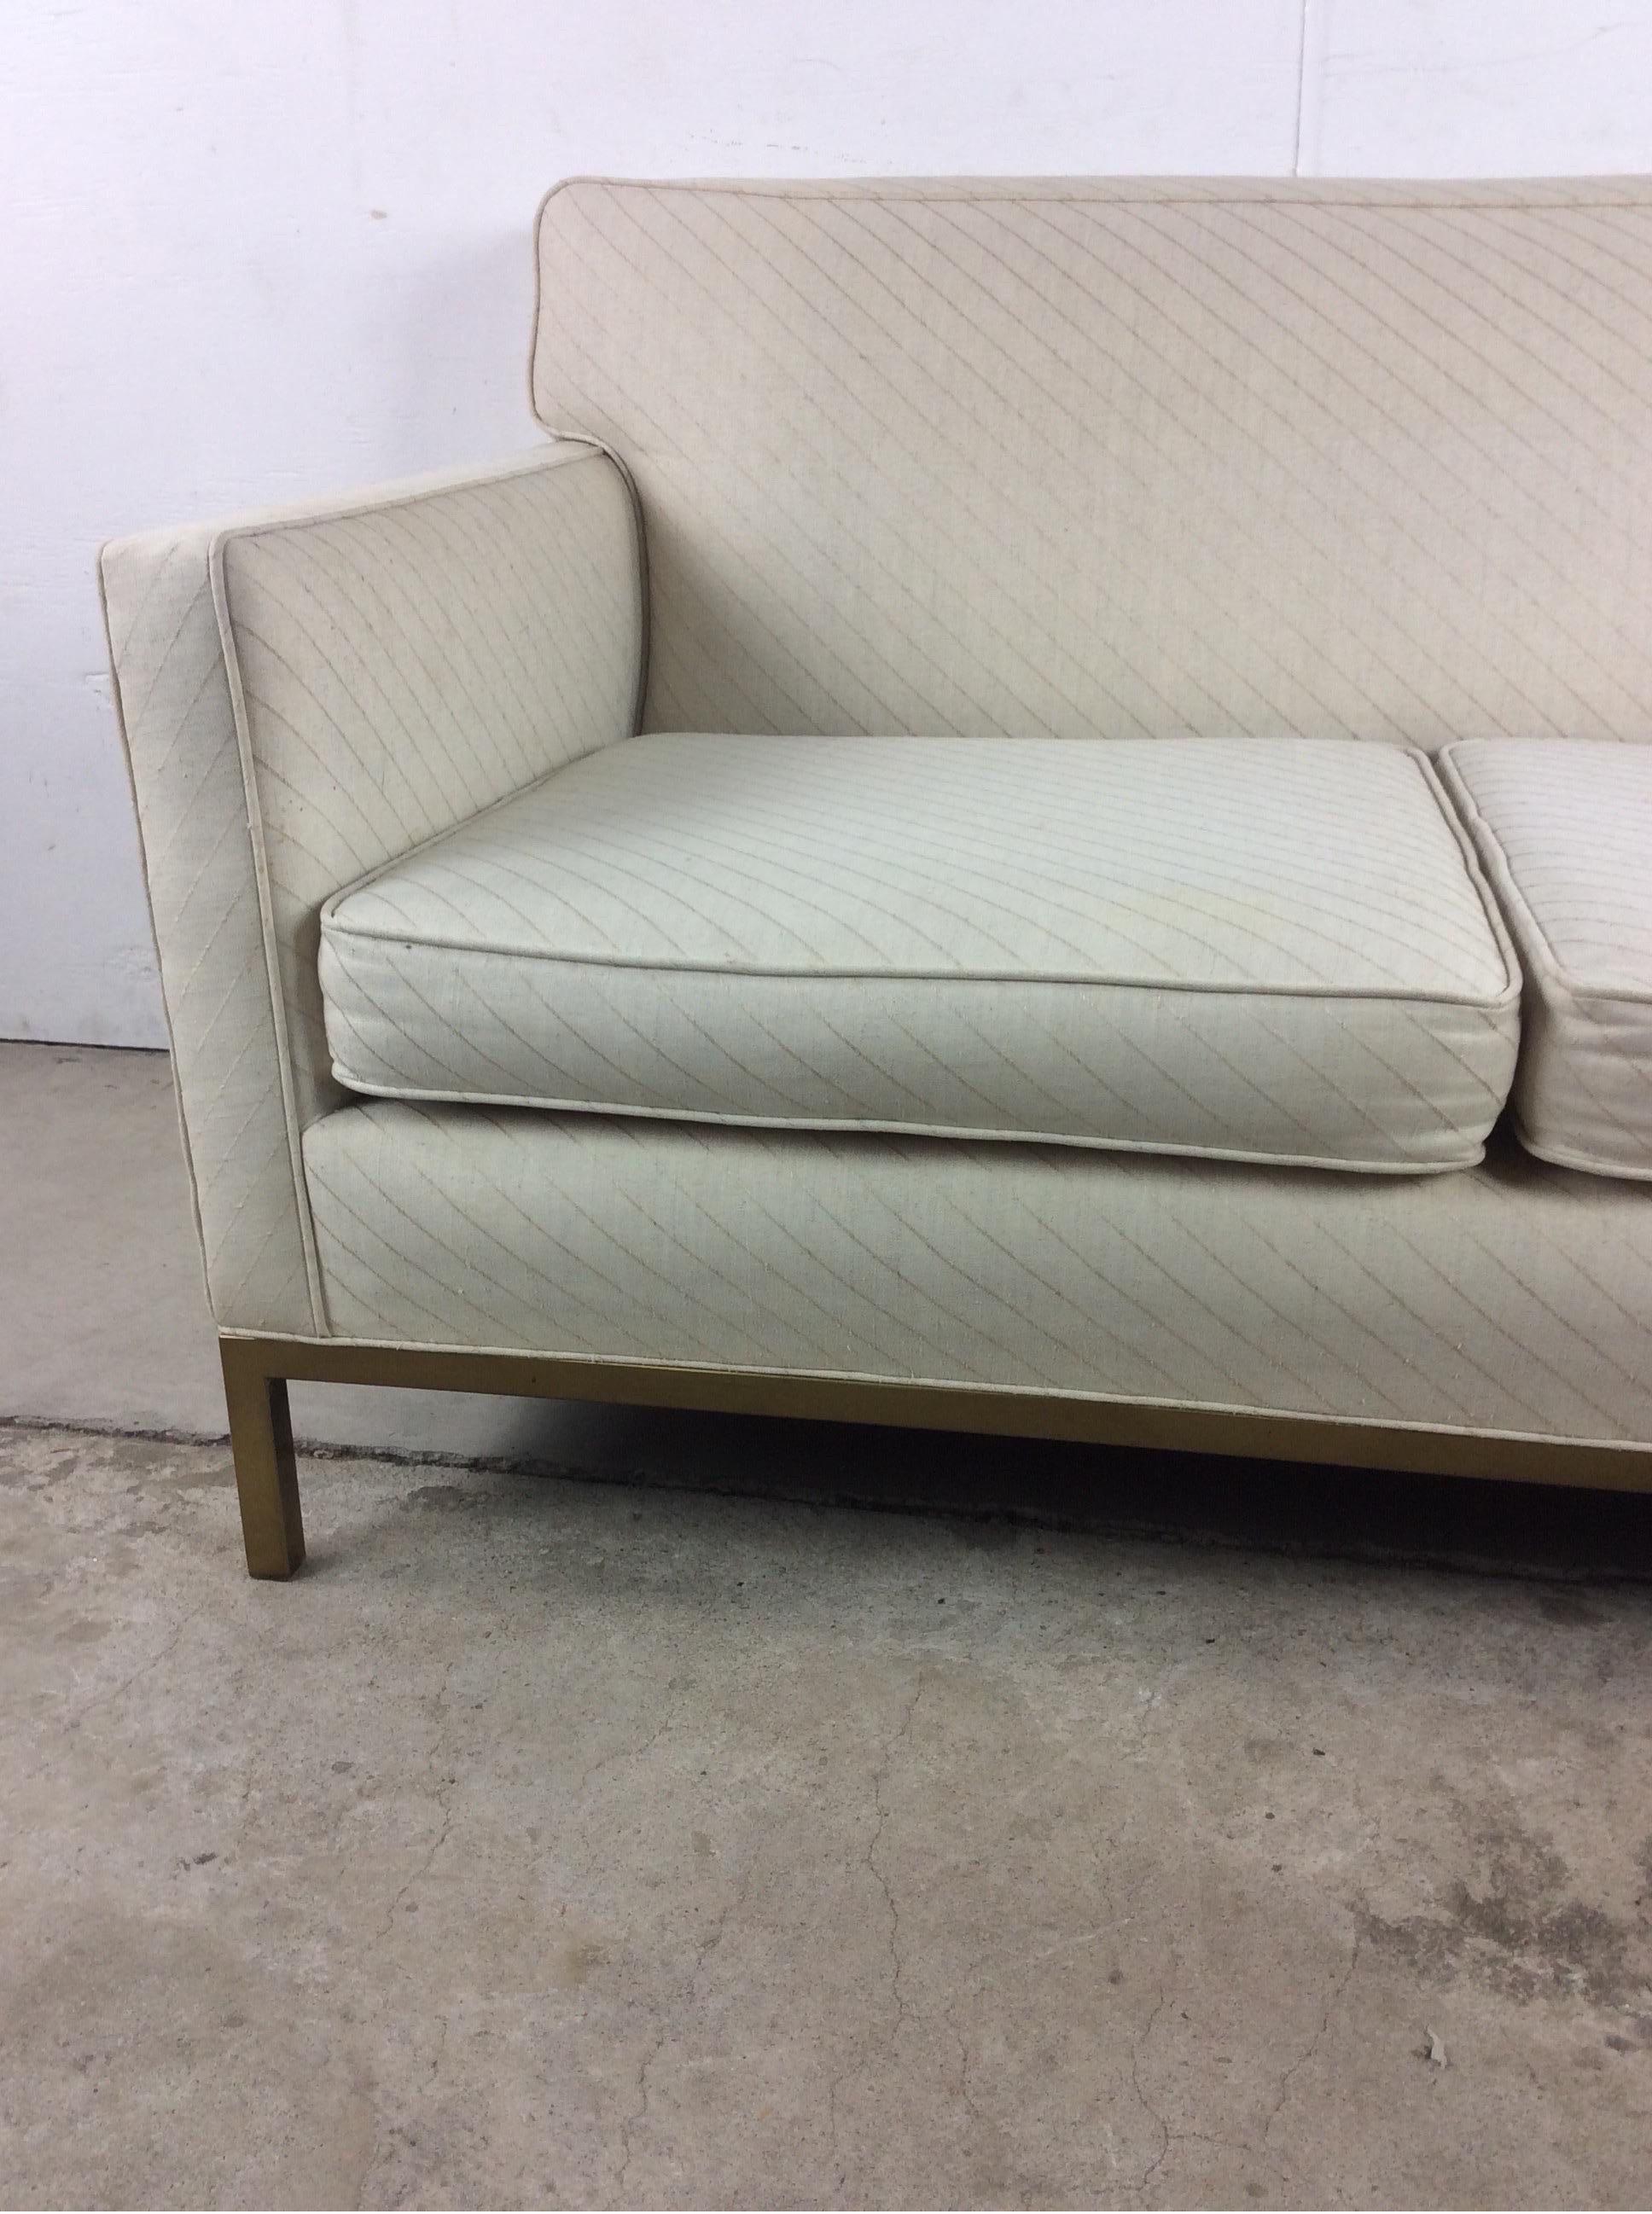 Midcentury Loveseat Sofa with Brass Base In Fair Condition For Sale In Freehold, NJ